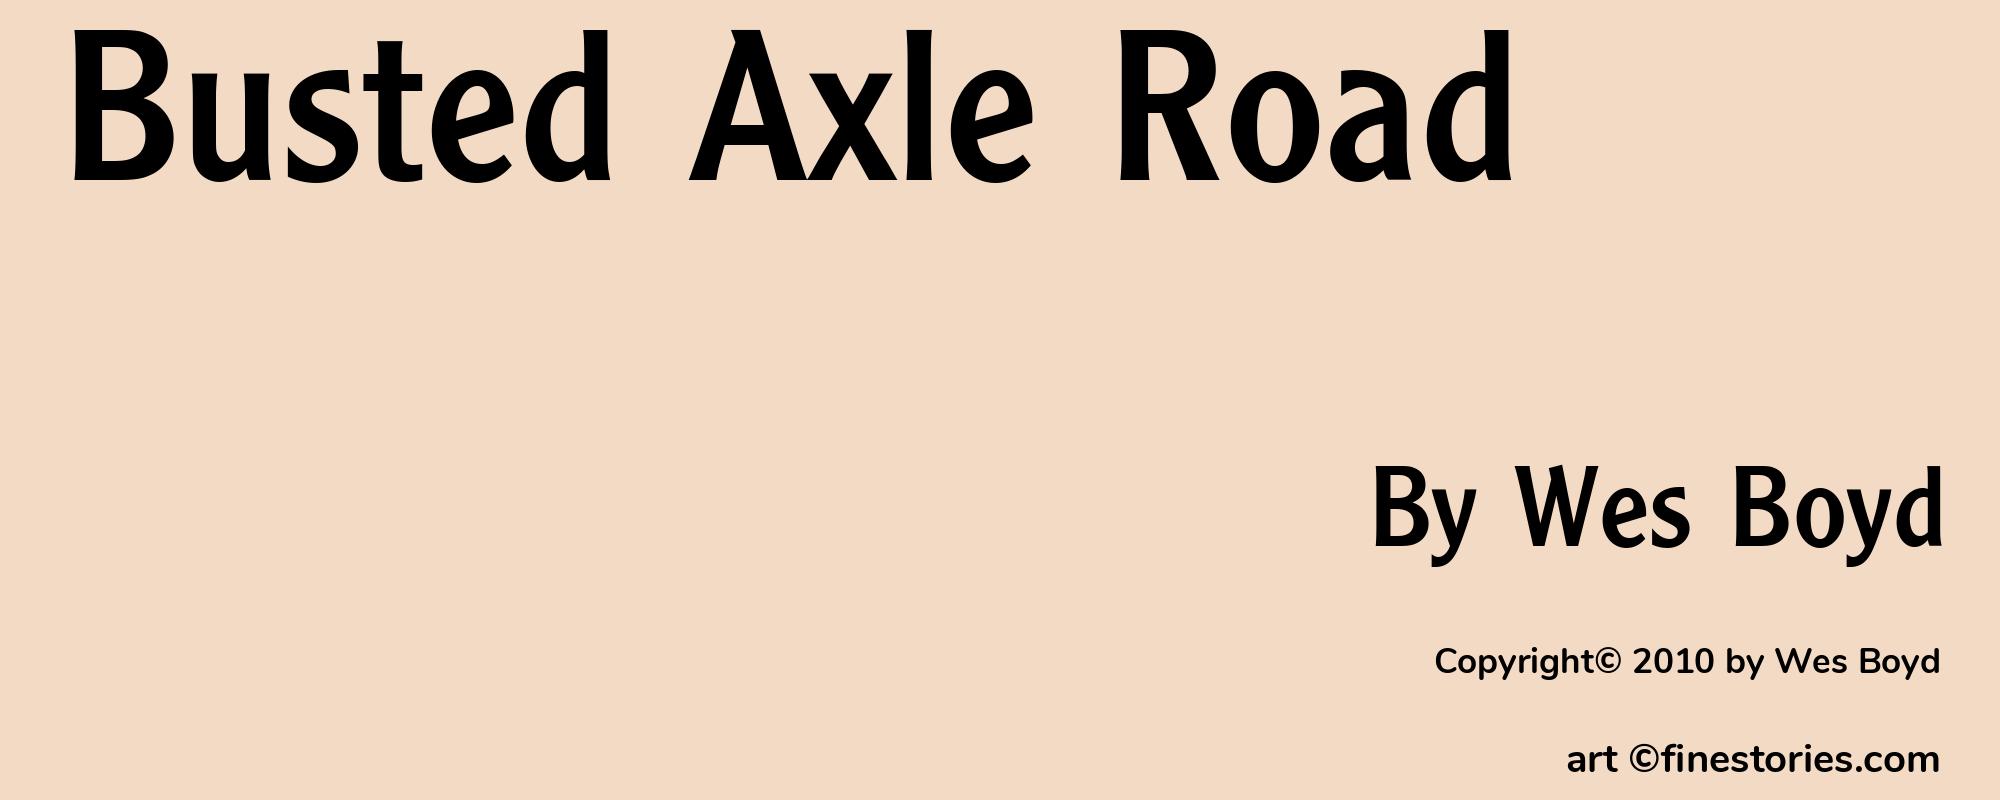 Busted Axle Road - Cover